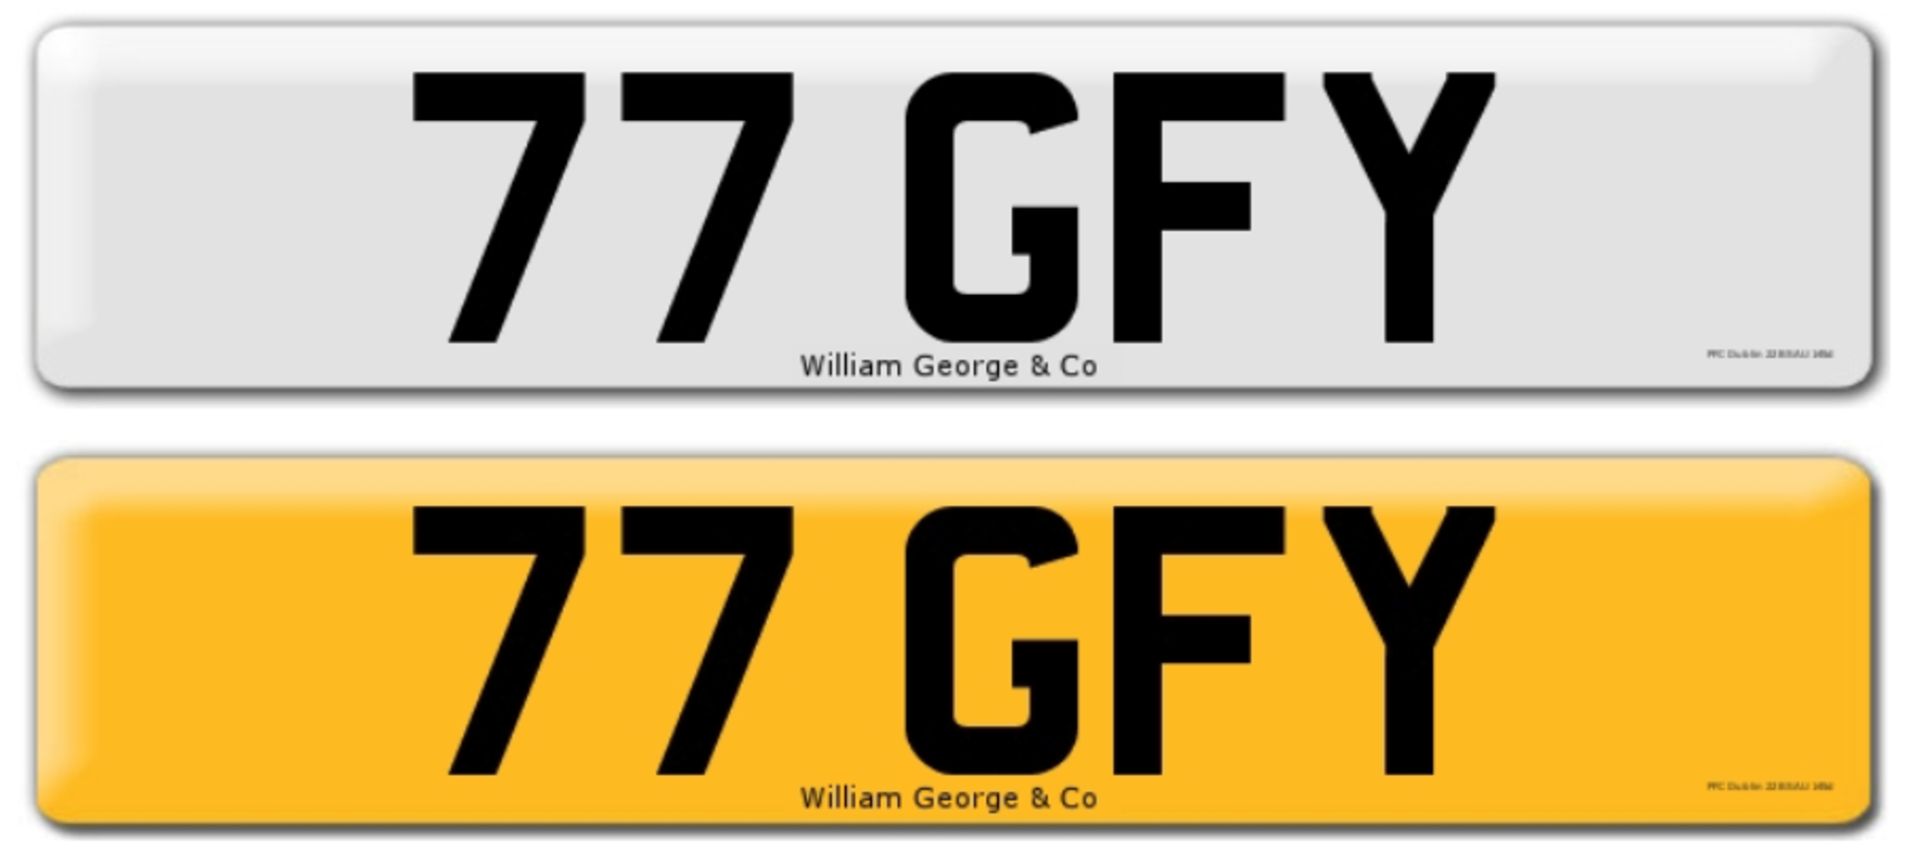 Registration on DVLA retention certificate, ready to transfer 77 GFY, This number plate /